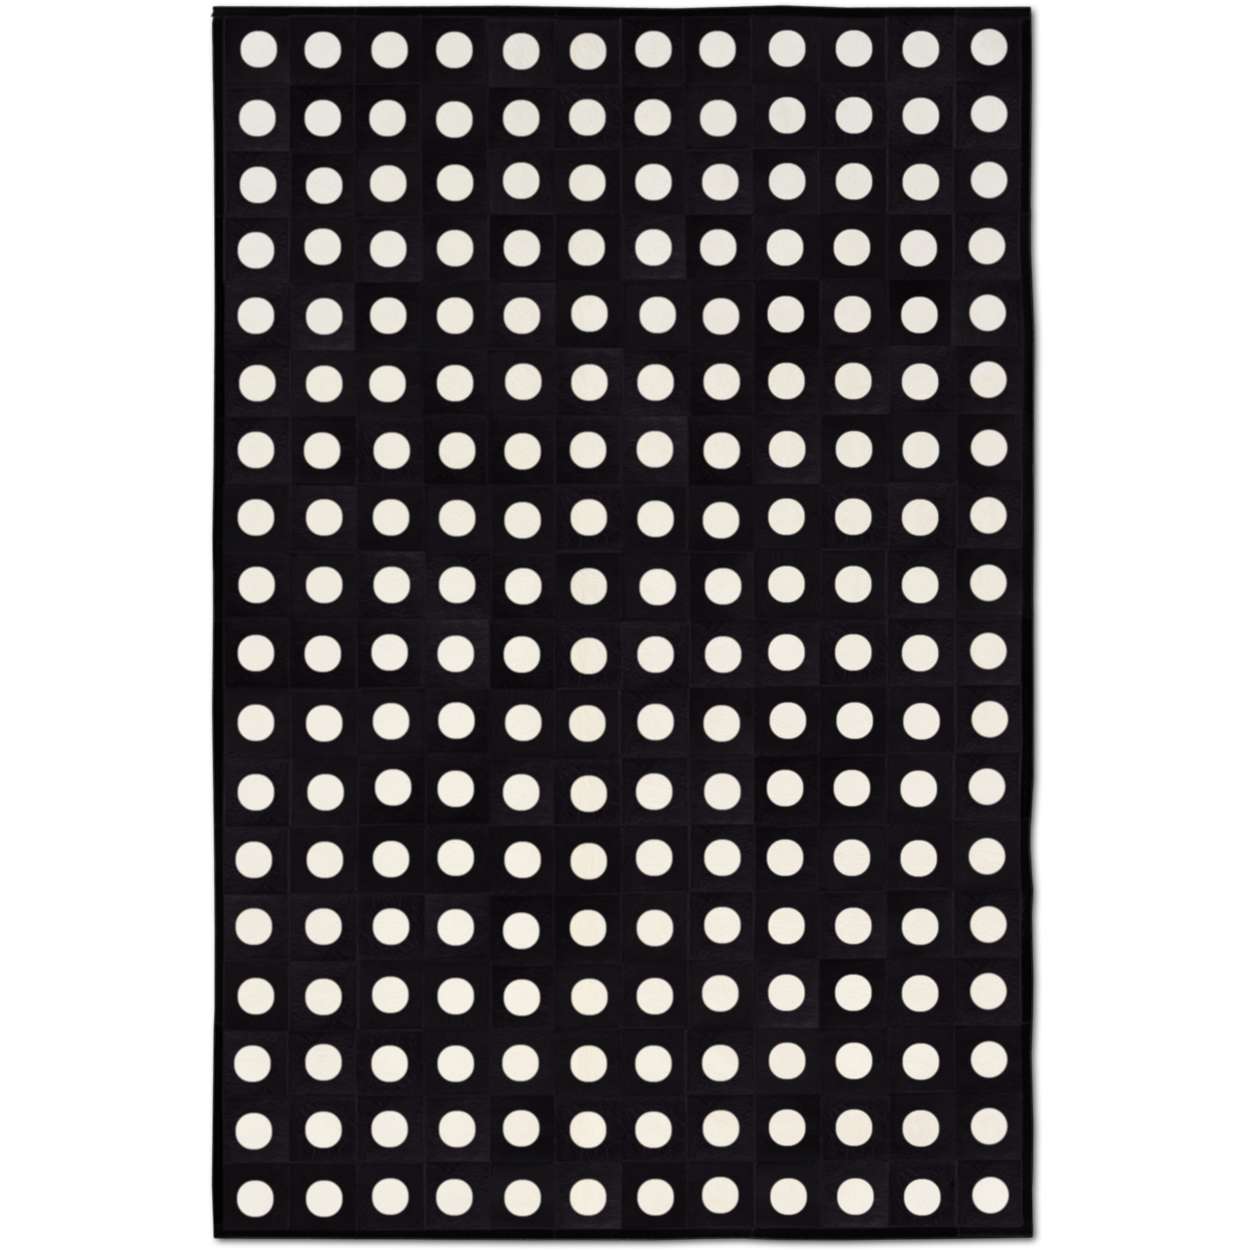 Custom Cowhide Patchwork Rug - 6in Squares - Dots Off White on Black